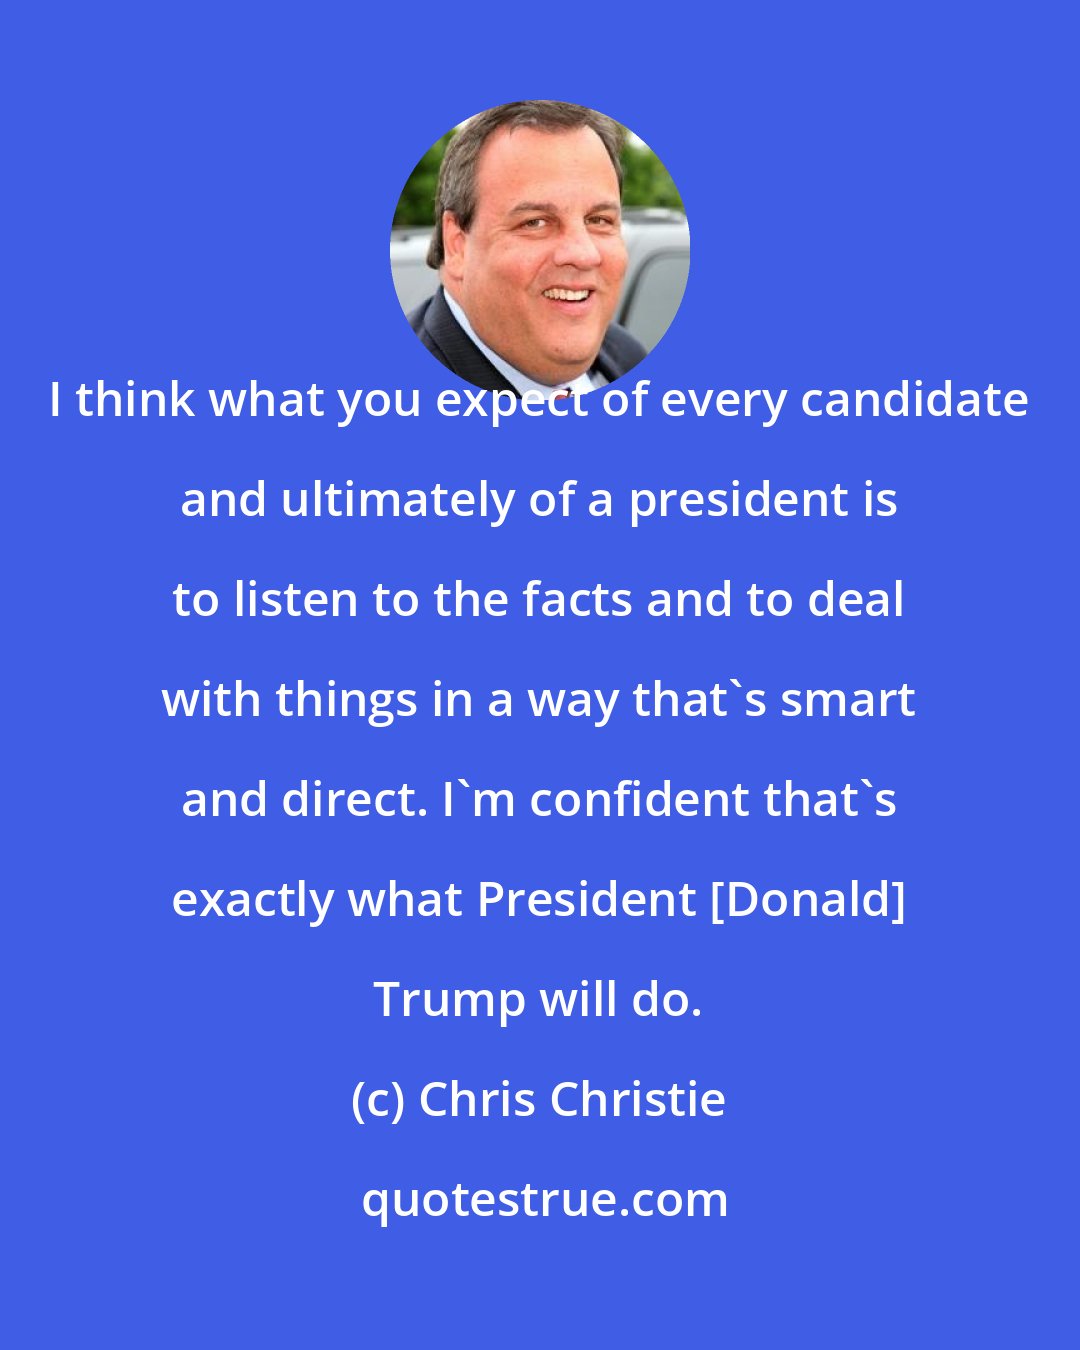 Chris Christie: I think what you expect of every candidate and ultimately of a president is to listen to the facts and to deal with things in a way that's smart and direct. I'm confident that's exactly what President [Donald] Trump will do.